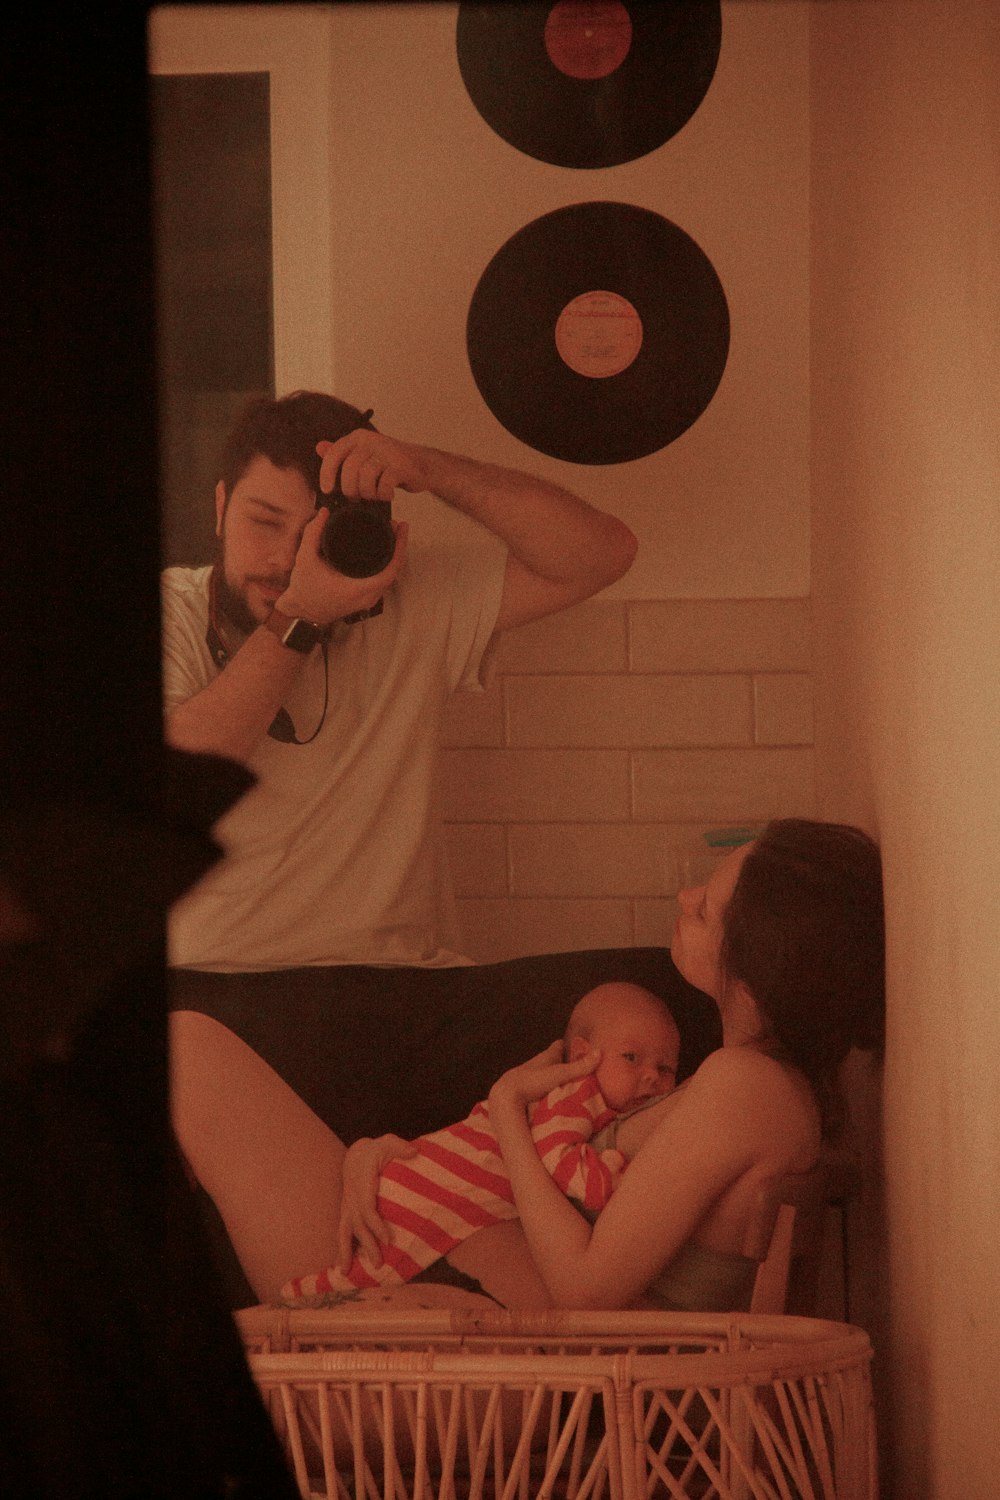 a man taking a picture of a woman holding a baby